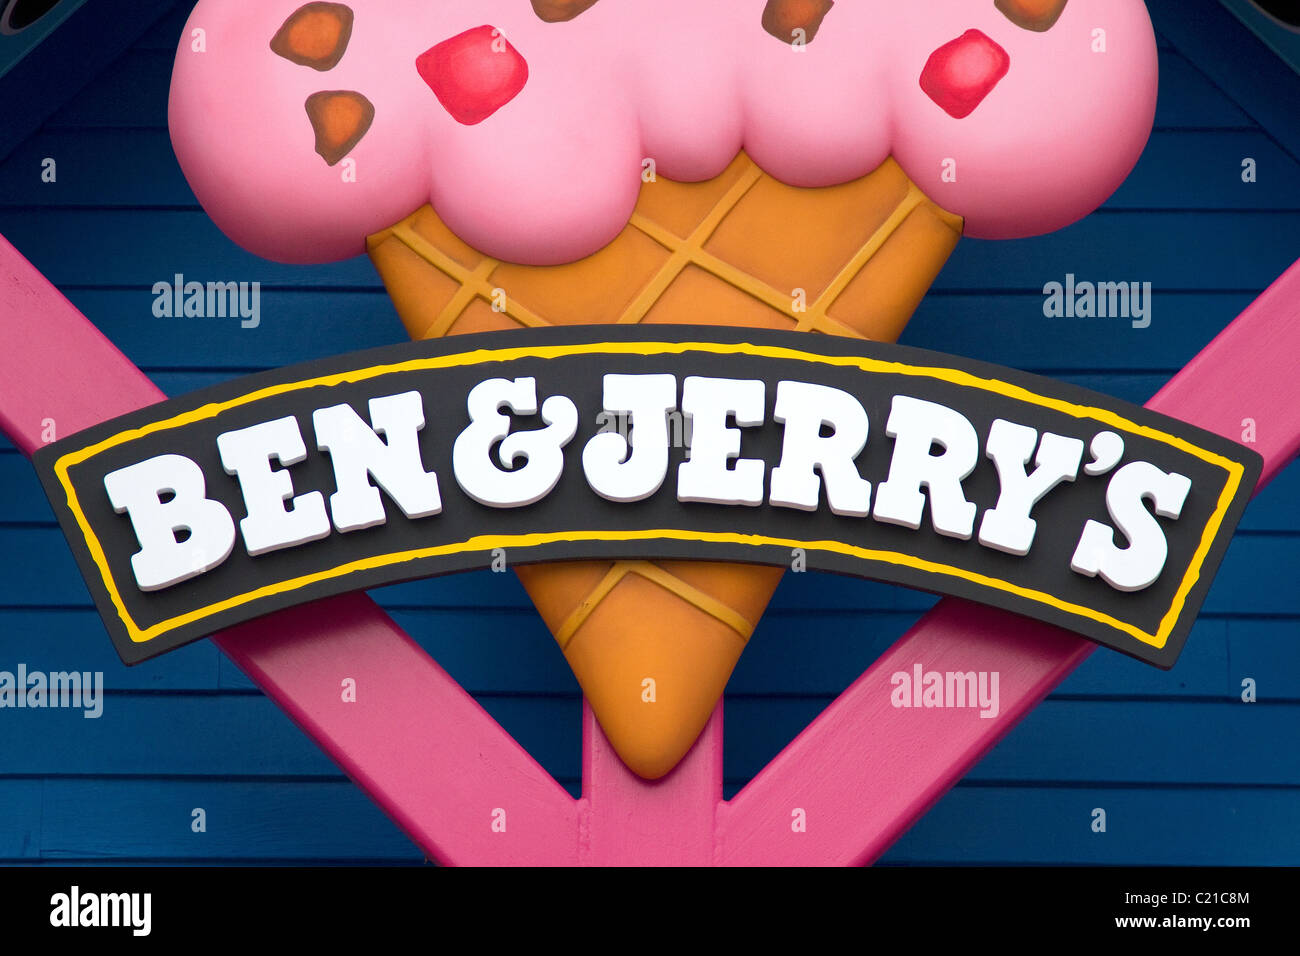 Ben and Jerry's, Ben and Jerry, ice cream factory in Waterbury, Vermont, USA. Stock Photo